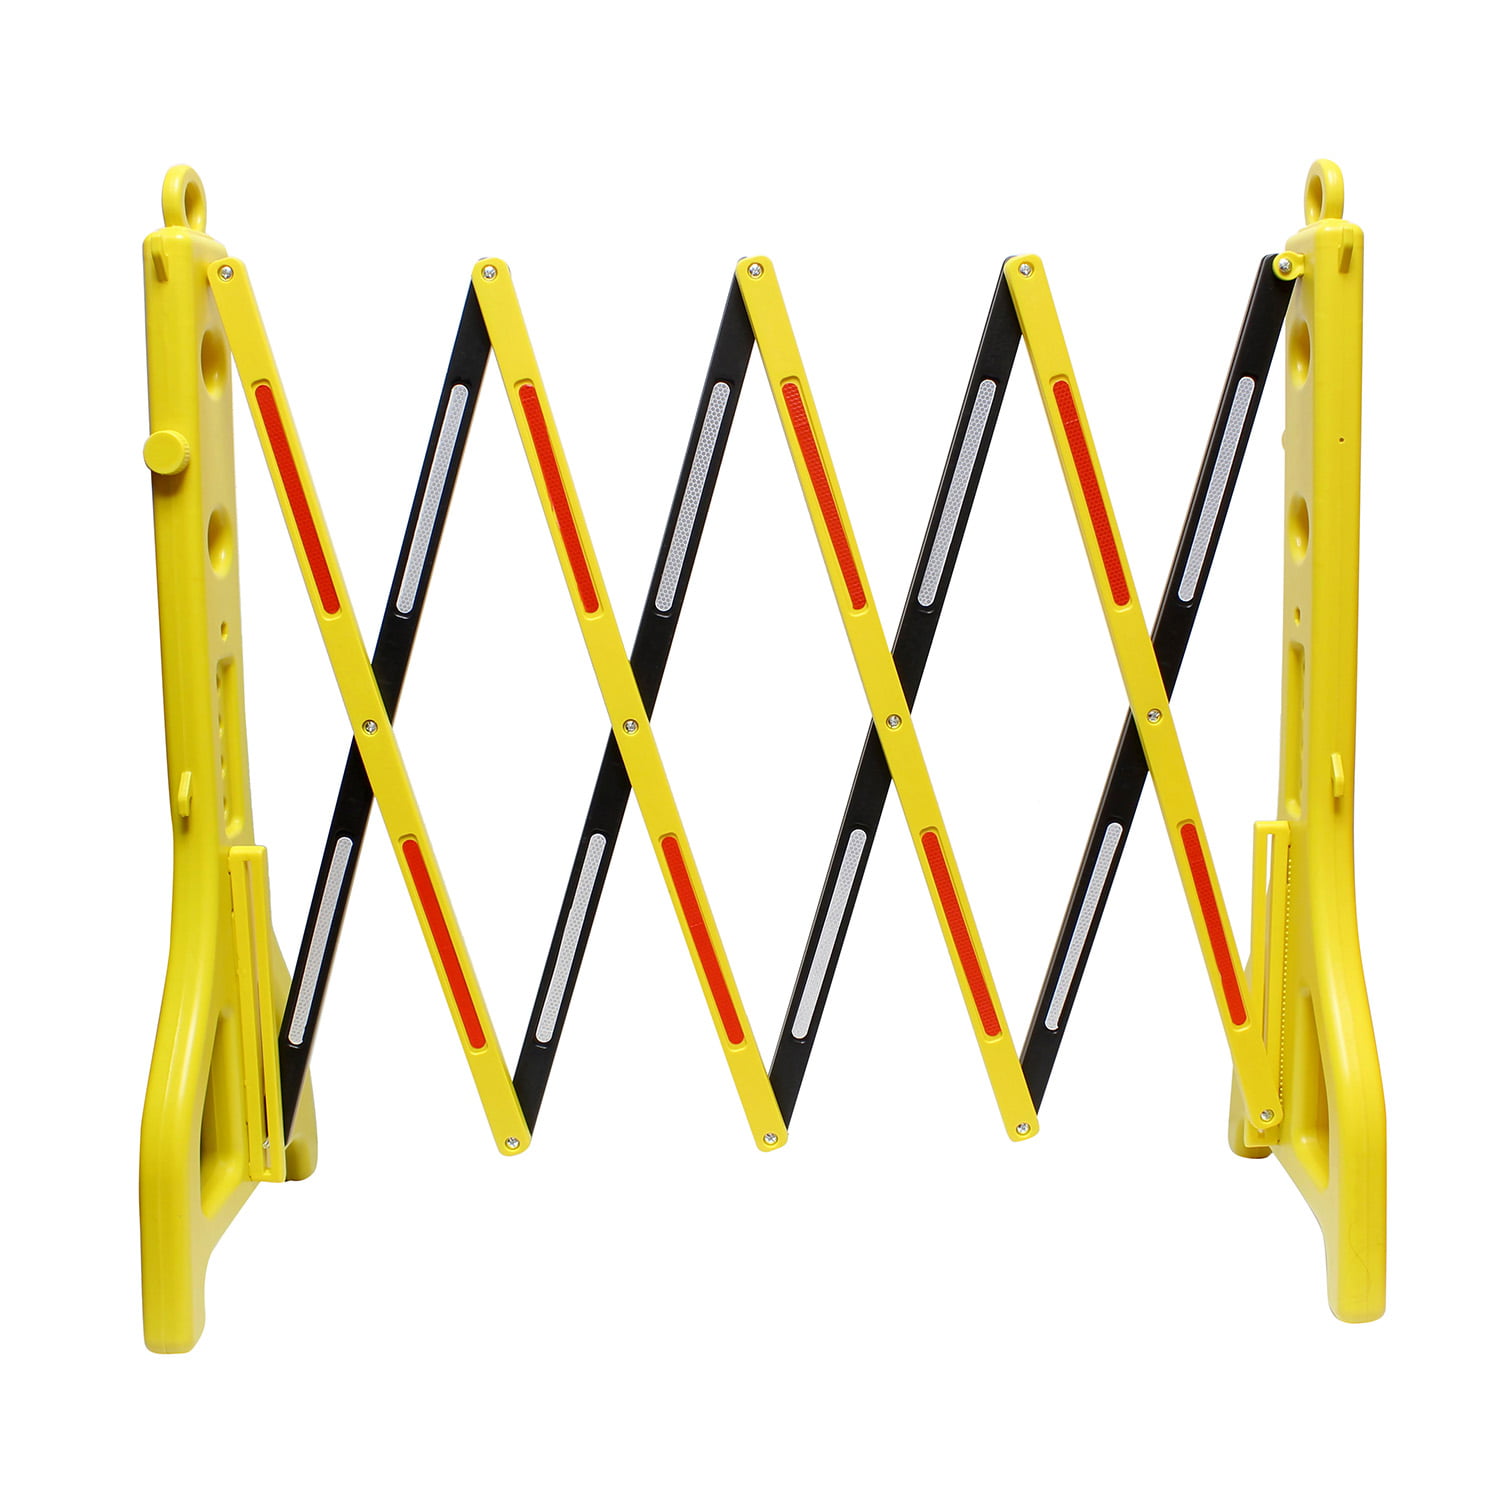 bisupply-folding-barricade-8-ft-portable-road-safety-barrier-with